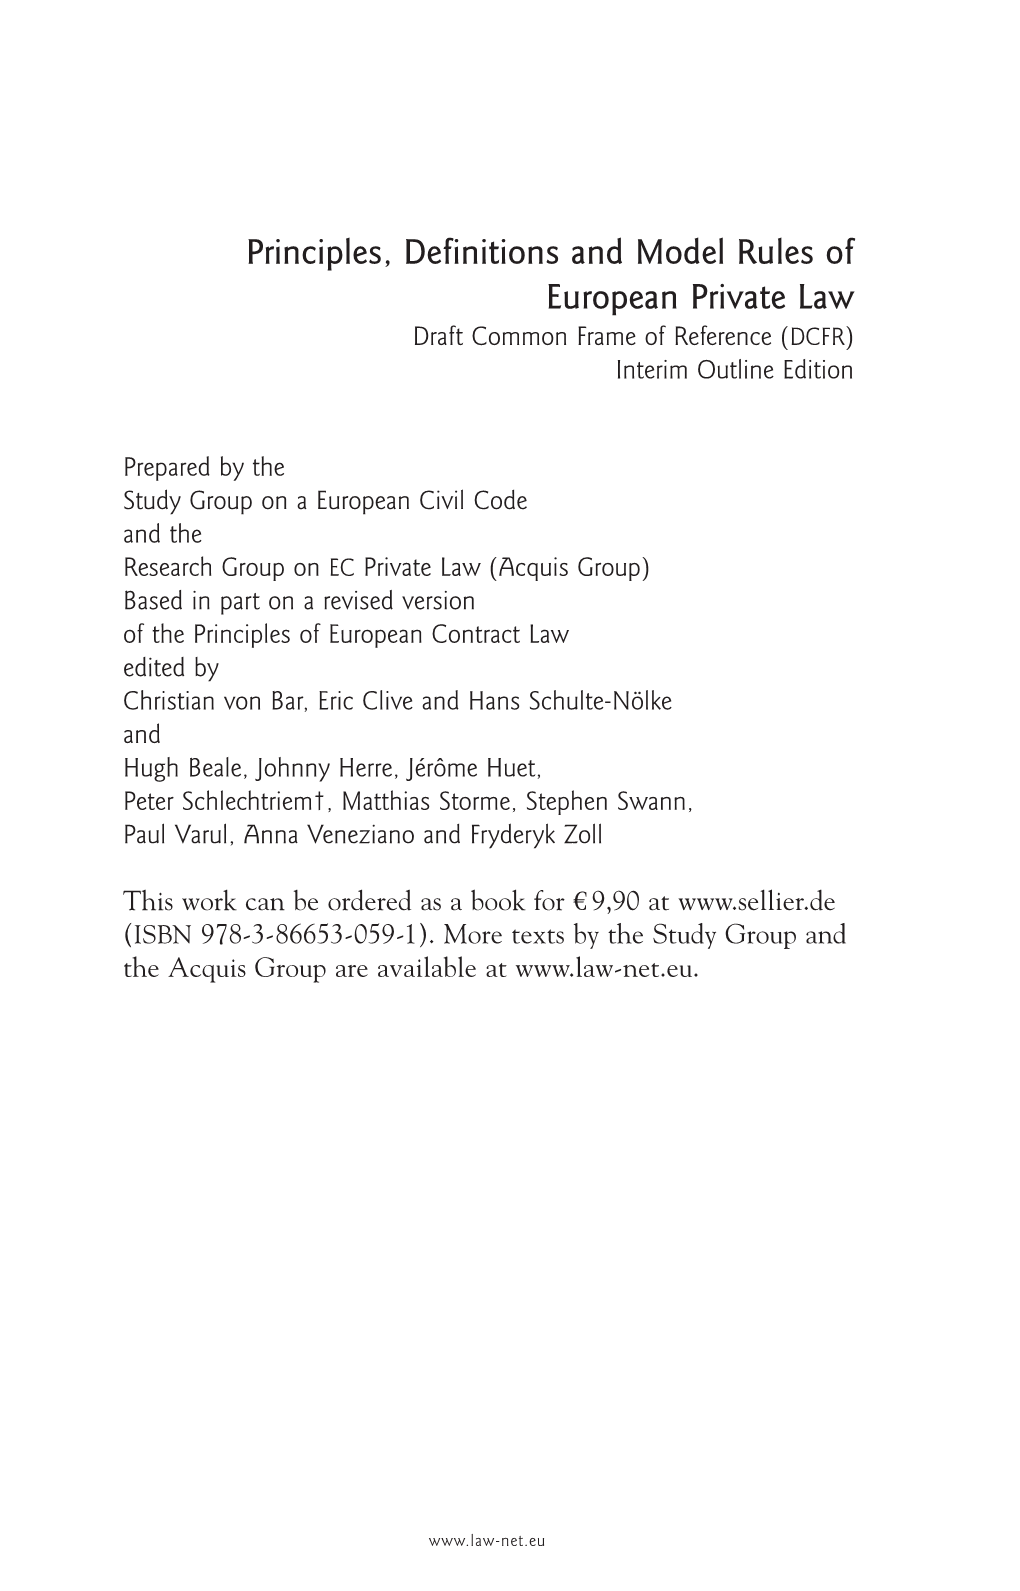 Principles, Definitions and Model Rules of European Private Law Draft Common Frame of Reference (DCFR) Interim Outline Edition